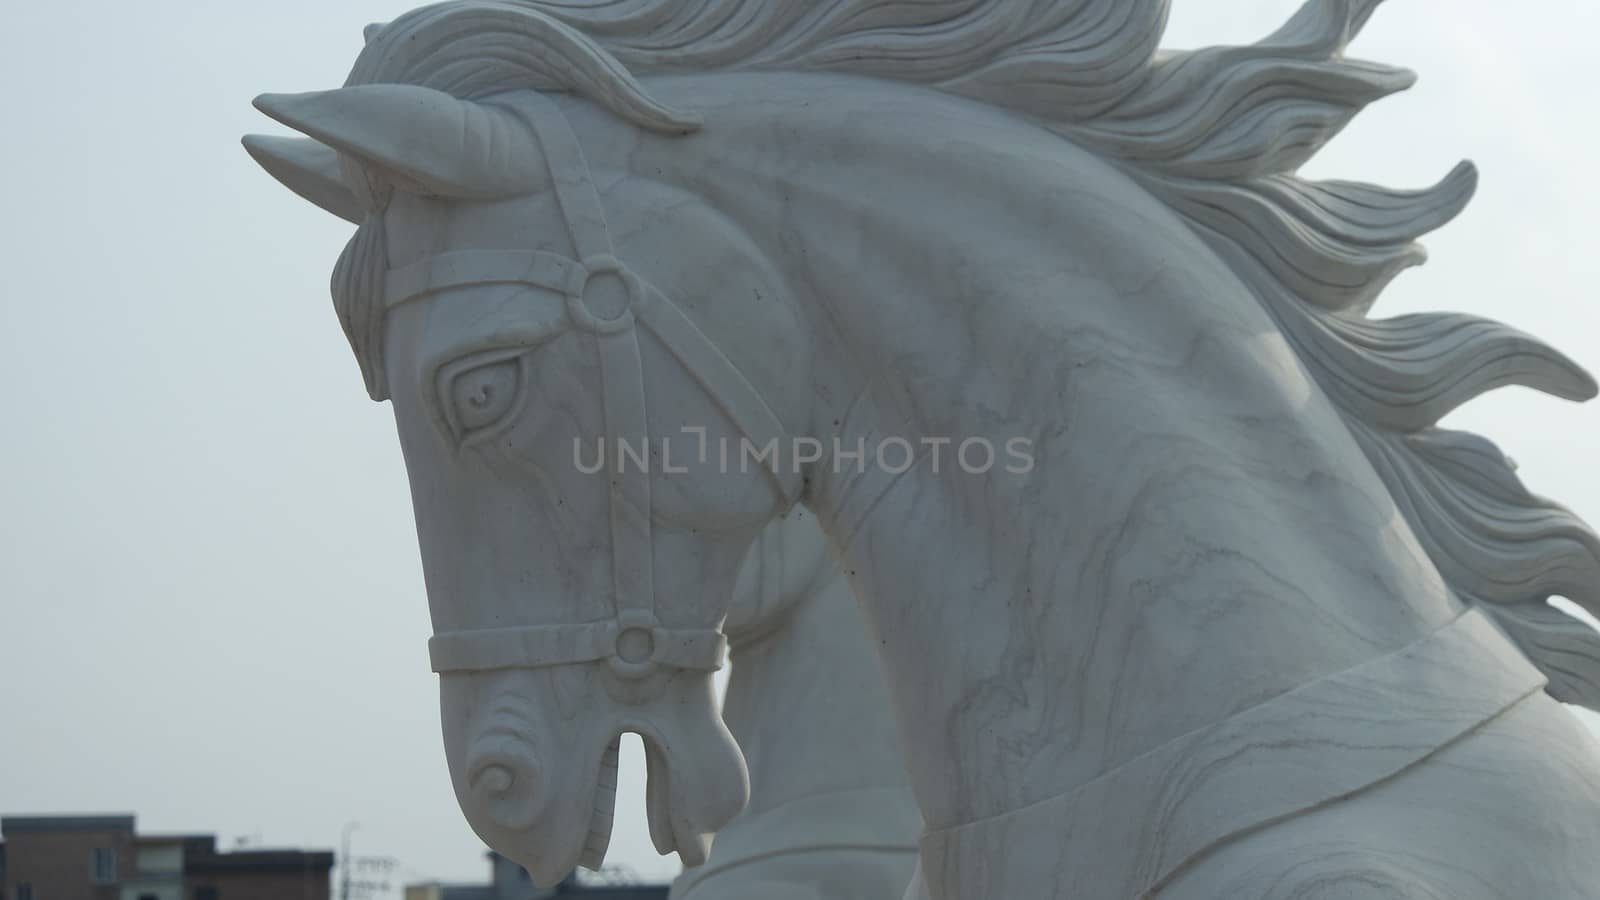 A photograph of a horse's head. Fragment of sculpture composition by Photochowk